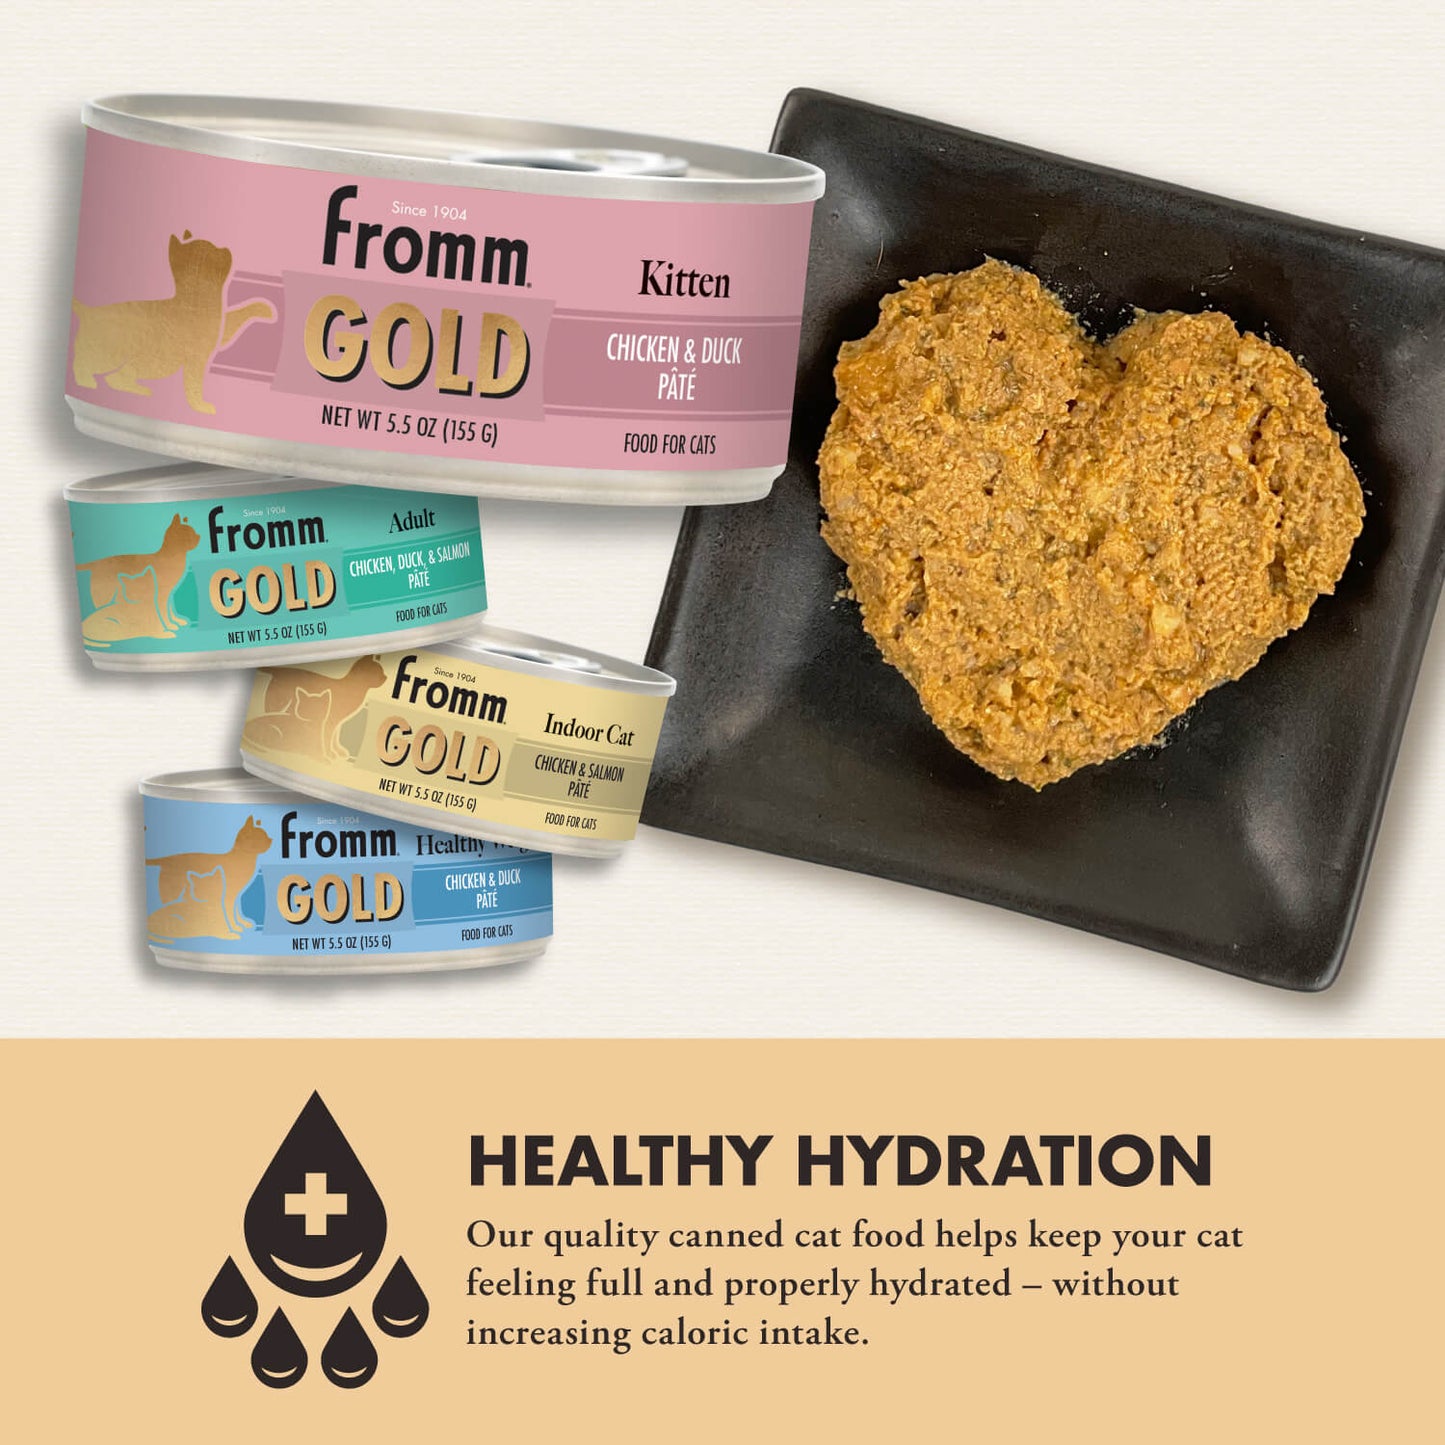 Fromm Gold Chicken and Duck Pate for Kittens